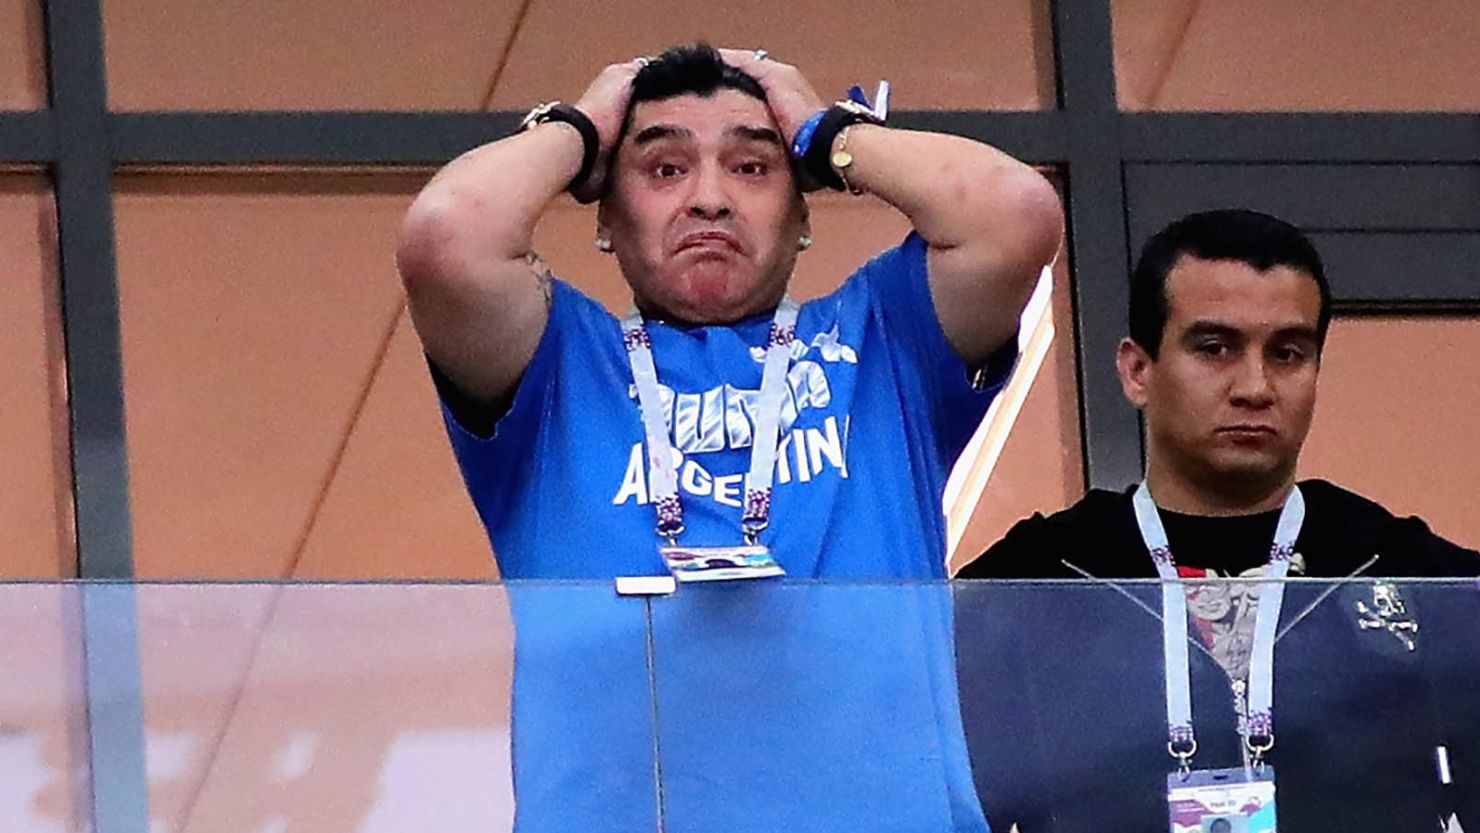 Diego Maradona's initially optimistic disposition quickly turned as Argentina lost 3-0 to Croatia in Group D on Thursday. 